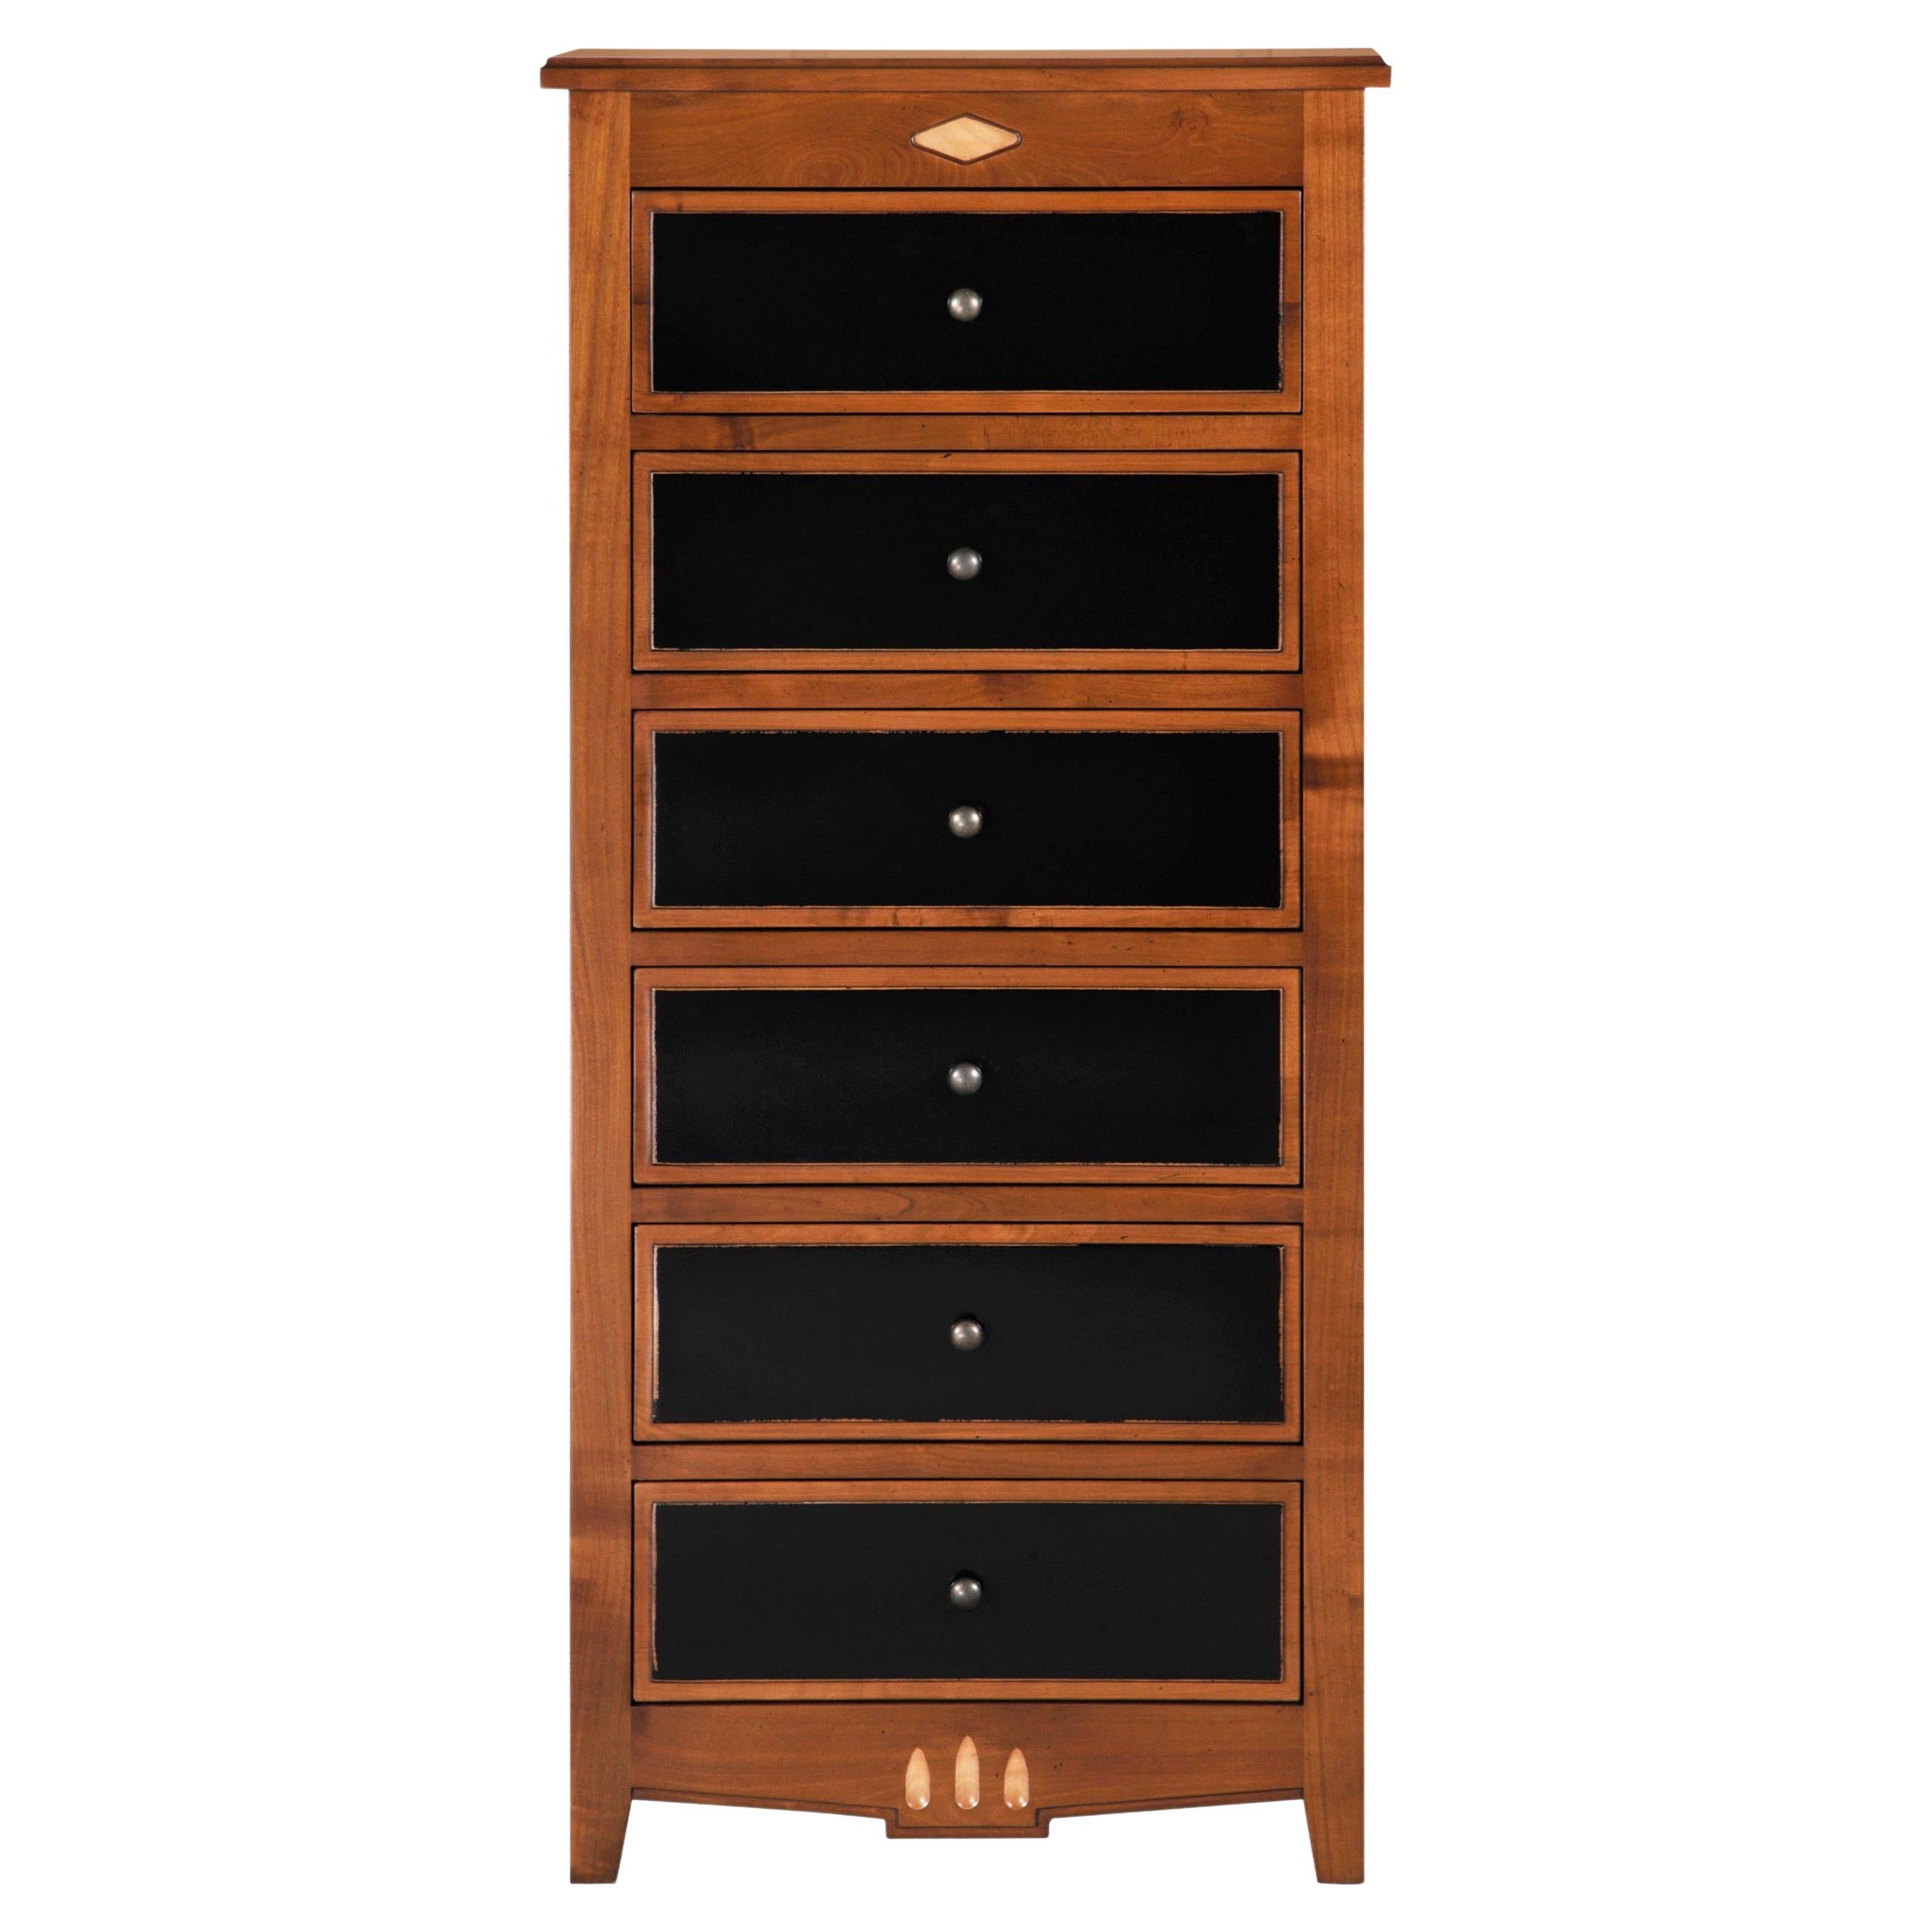 6-Drawer "Chiffonnier" in cherry Louis XVI style with black laquered Drawers For Sale